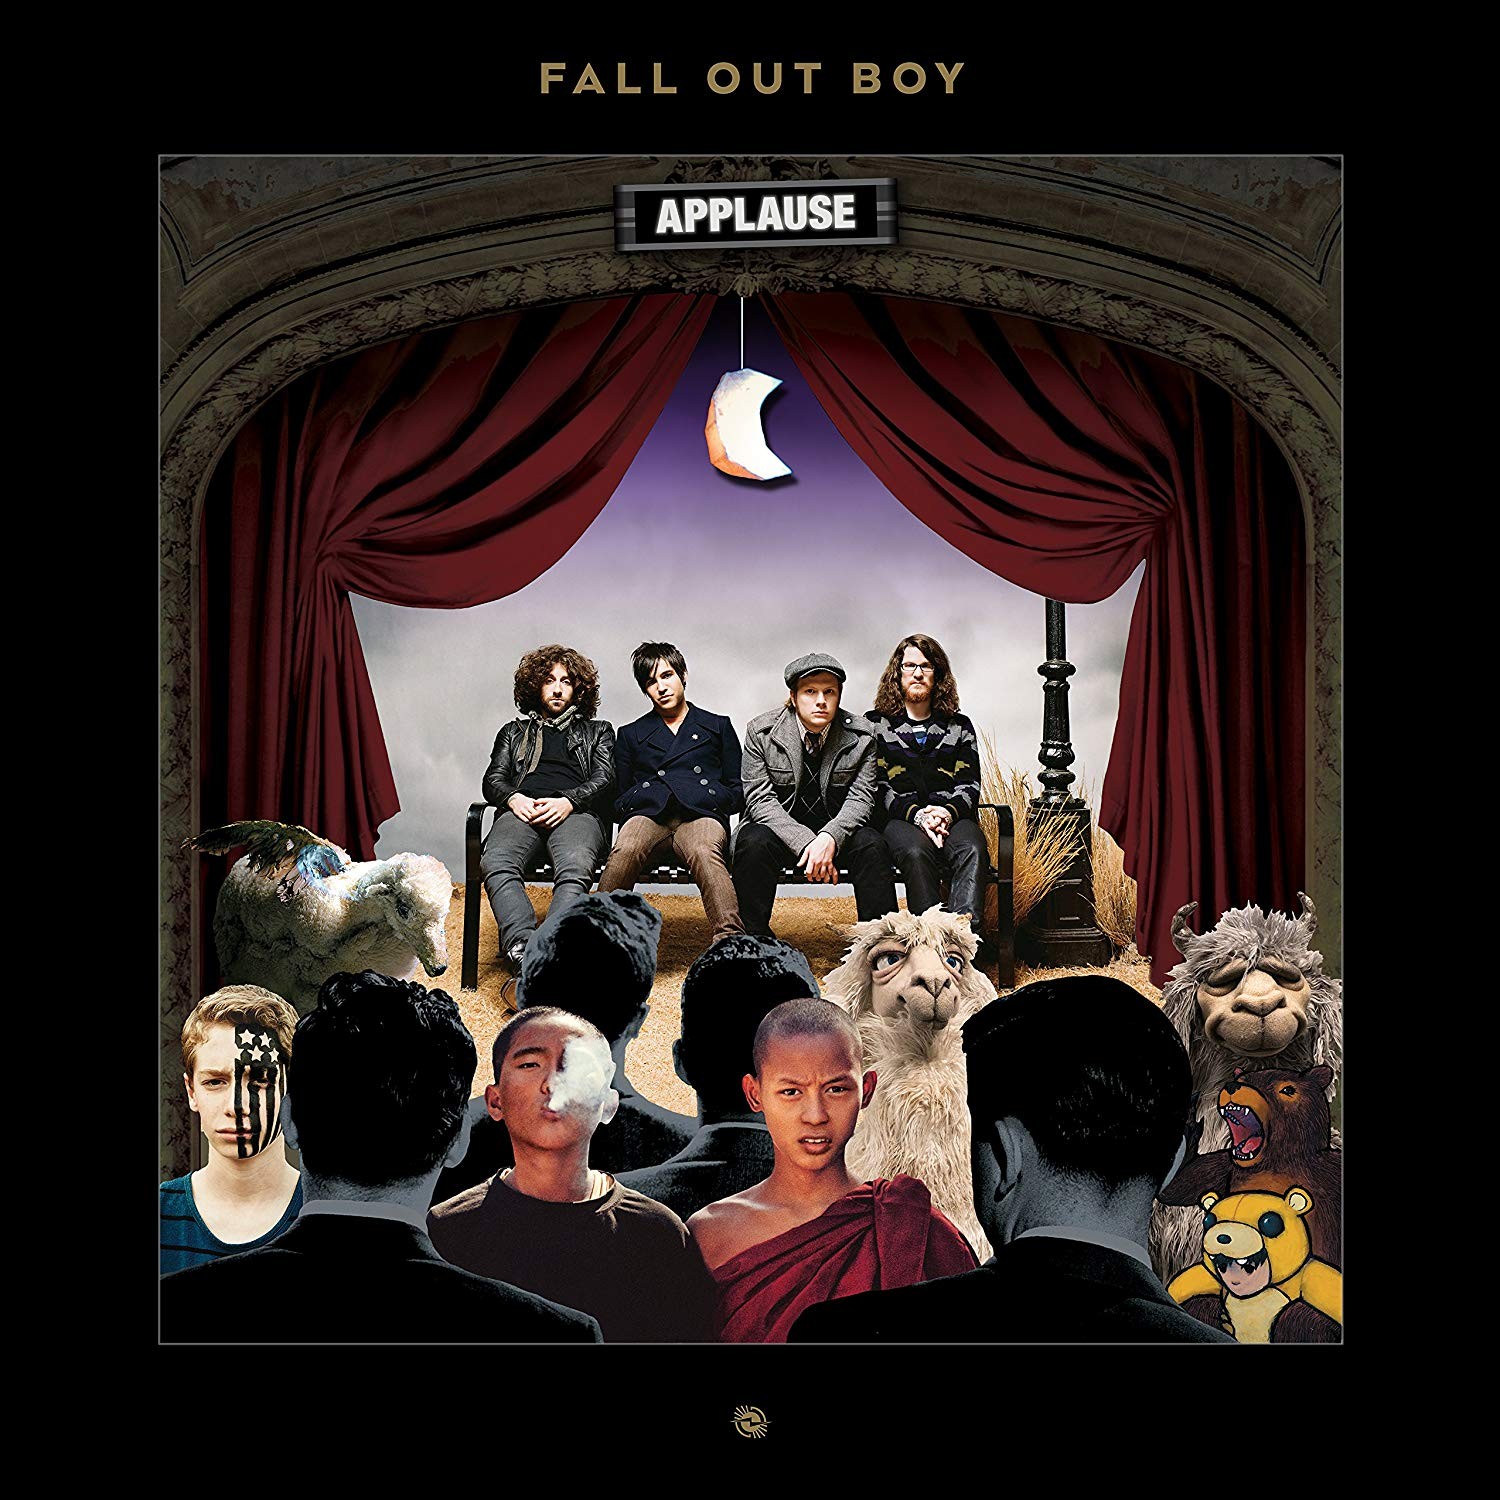 Fall Out Boy - Complete Studio Albums Boxset